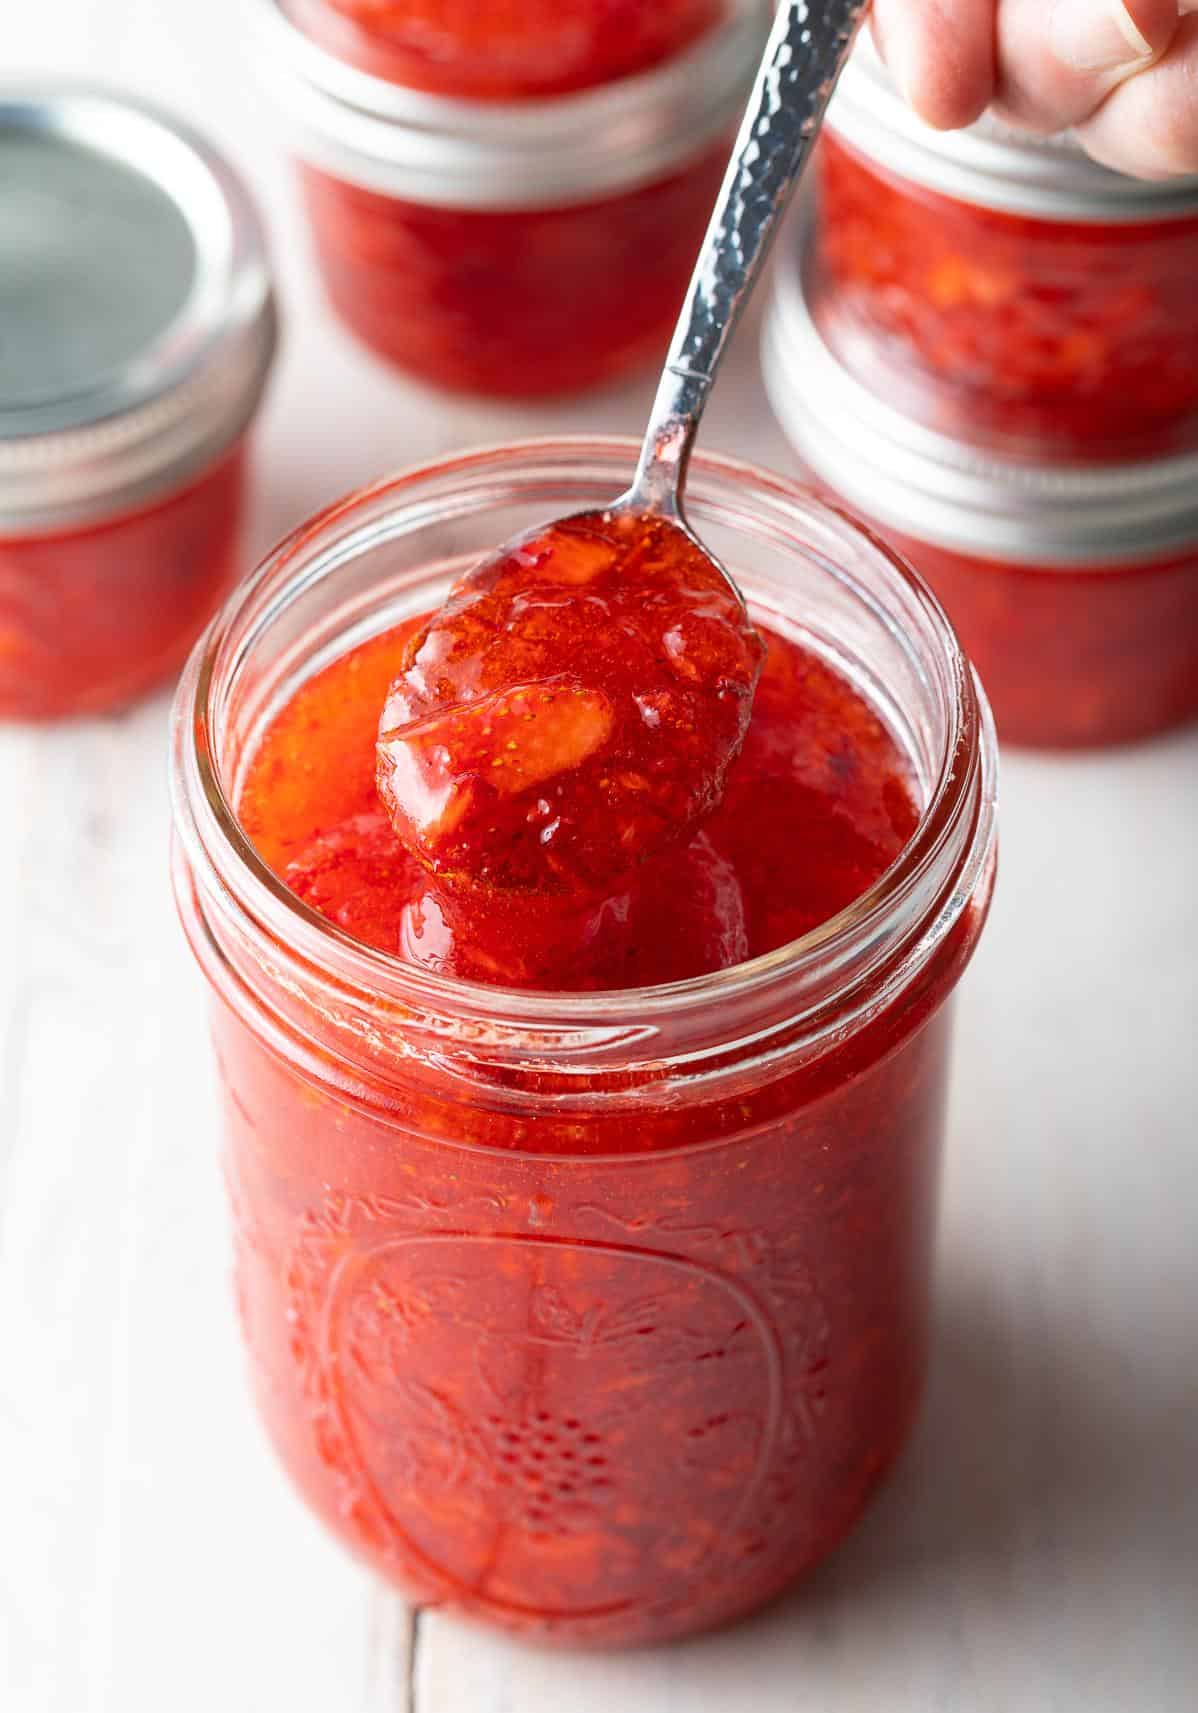  Don't let your ripe fruit go to waste - make some delicious jam!